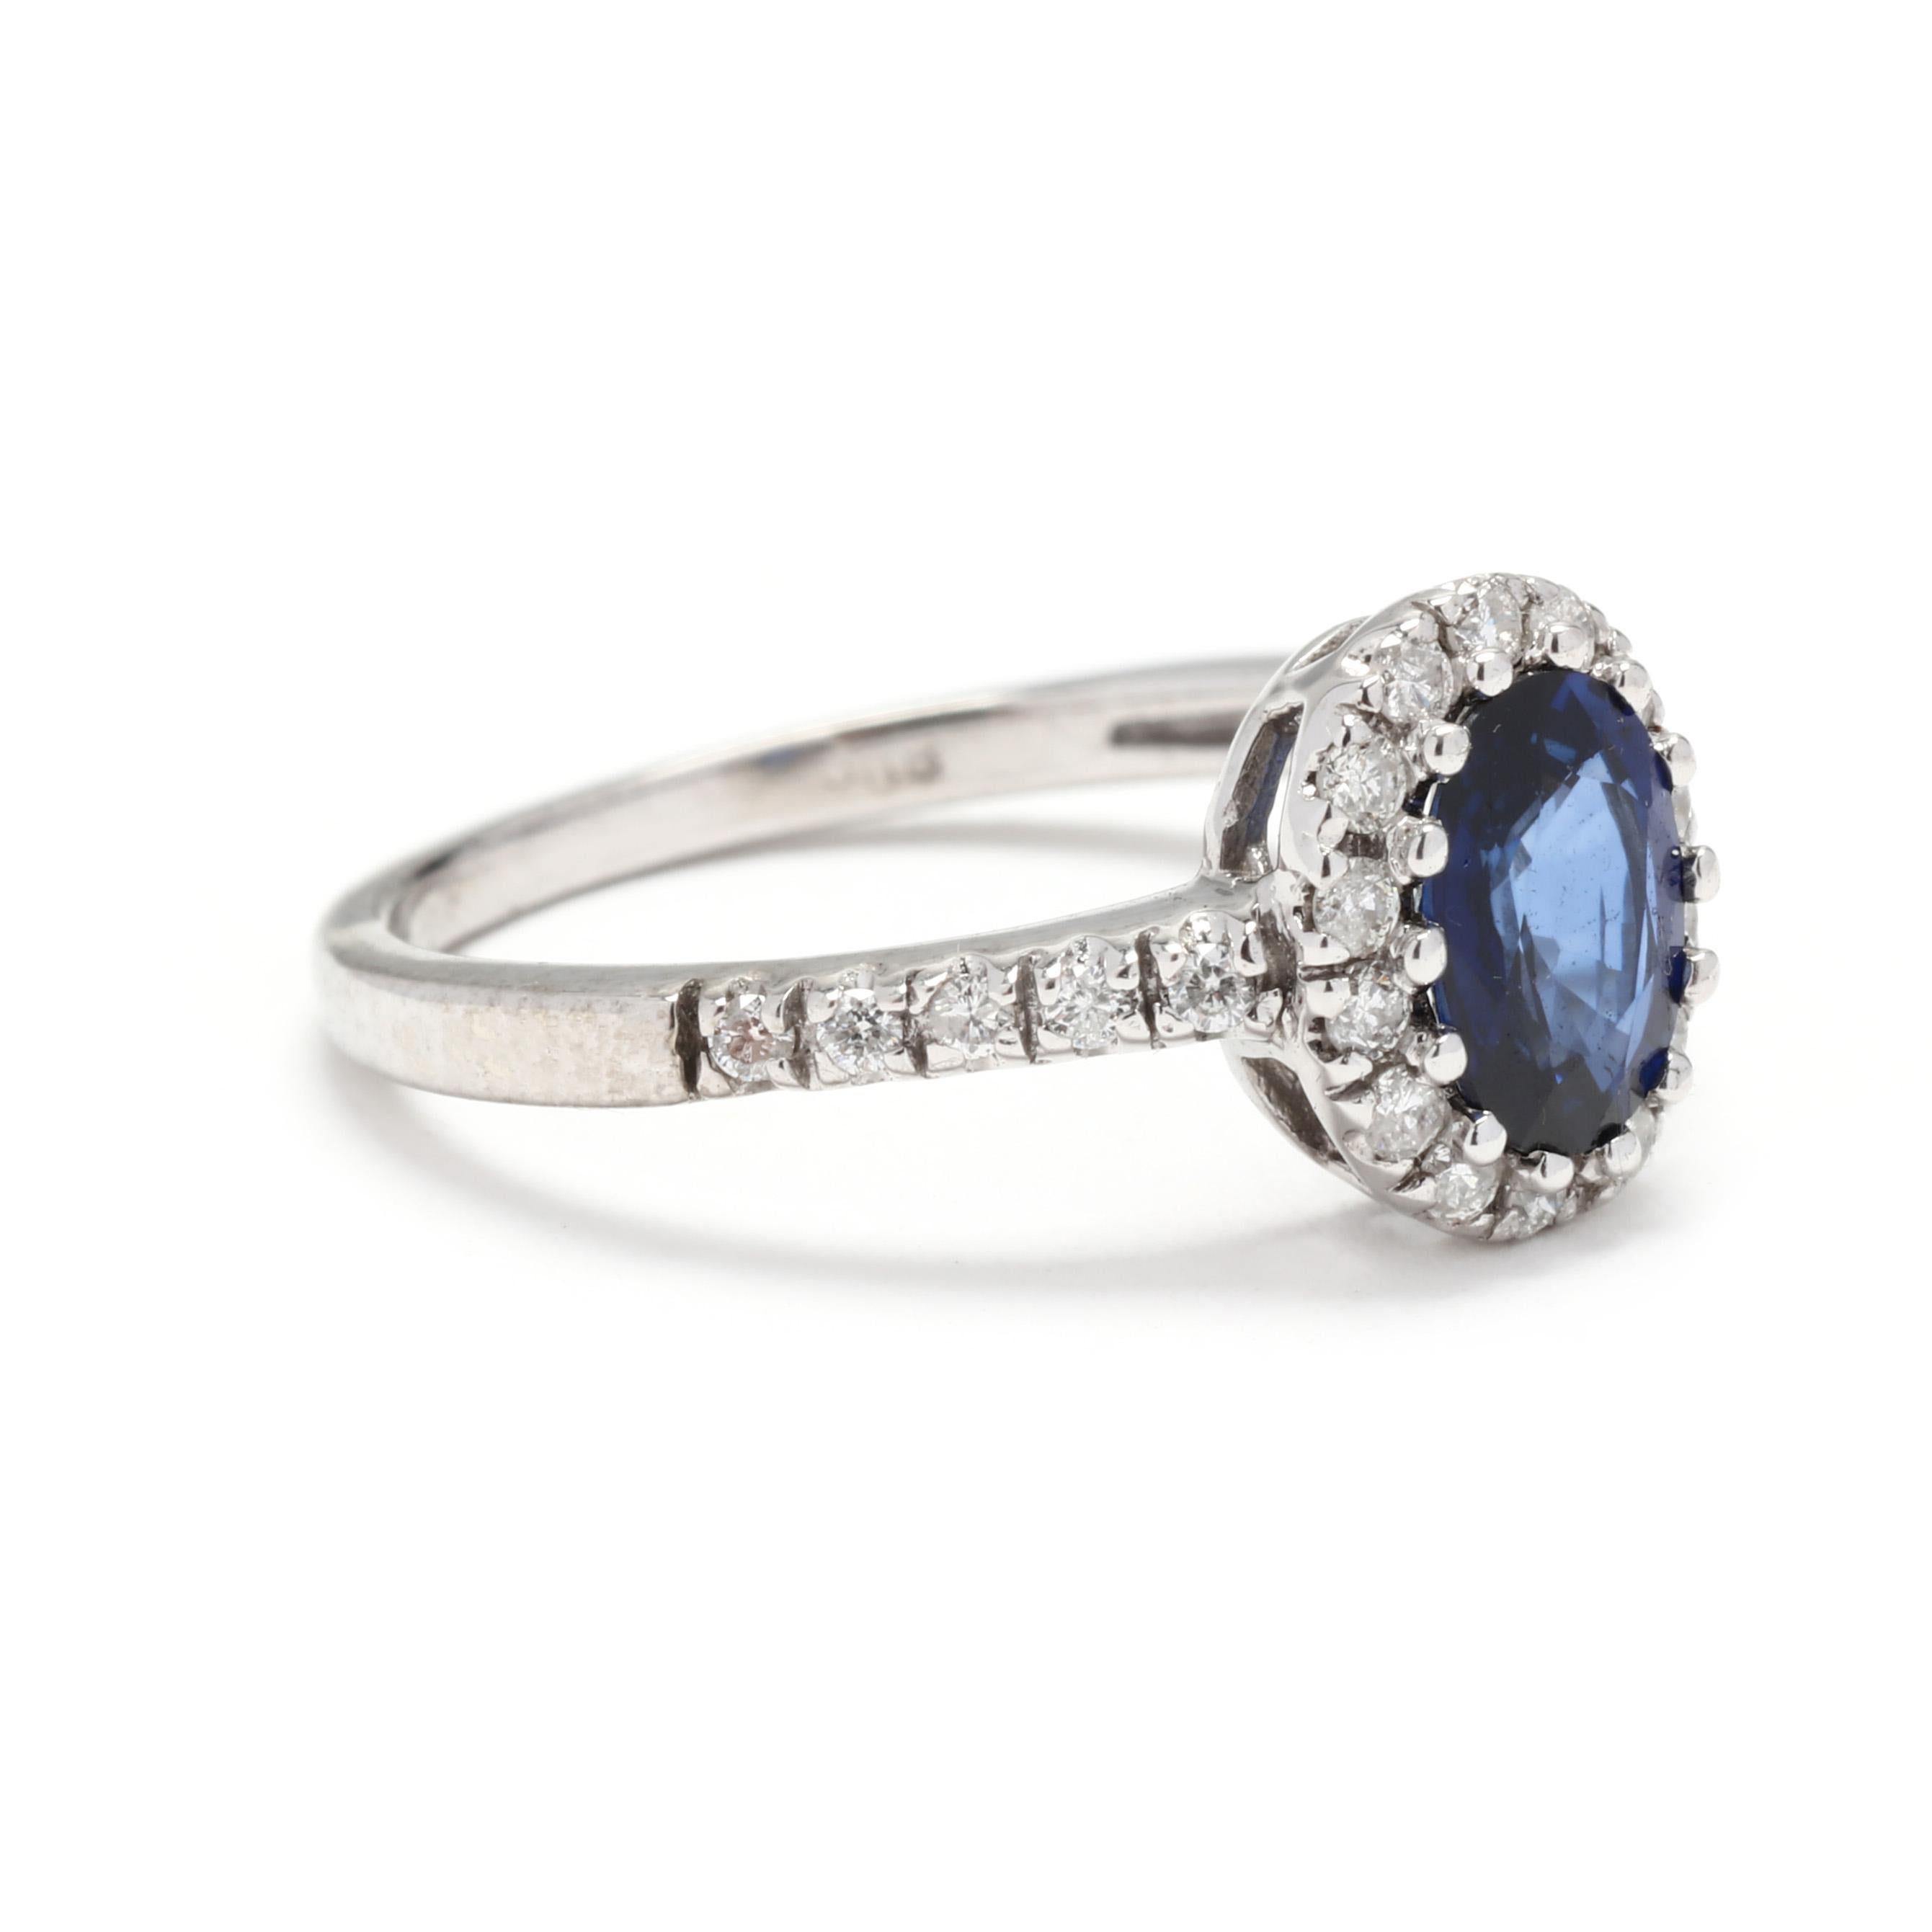 A 14 karat white gold sapphire and diamond halo engagement ring. This natural sapphire ring features an oval cut blue sapphire weighing approximately 1.10 carat surrounded by a halo of round brilliant cut diamonds and down the band weighing